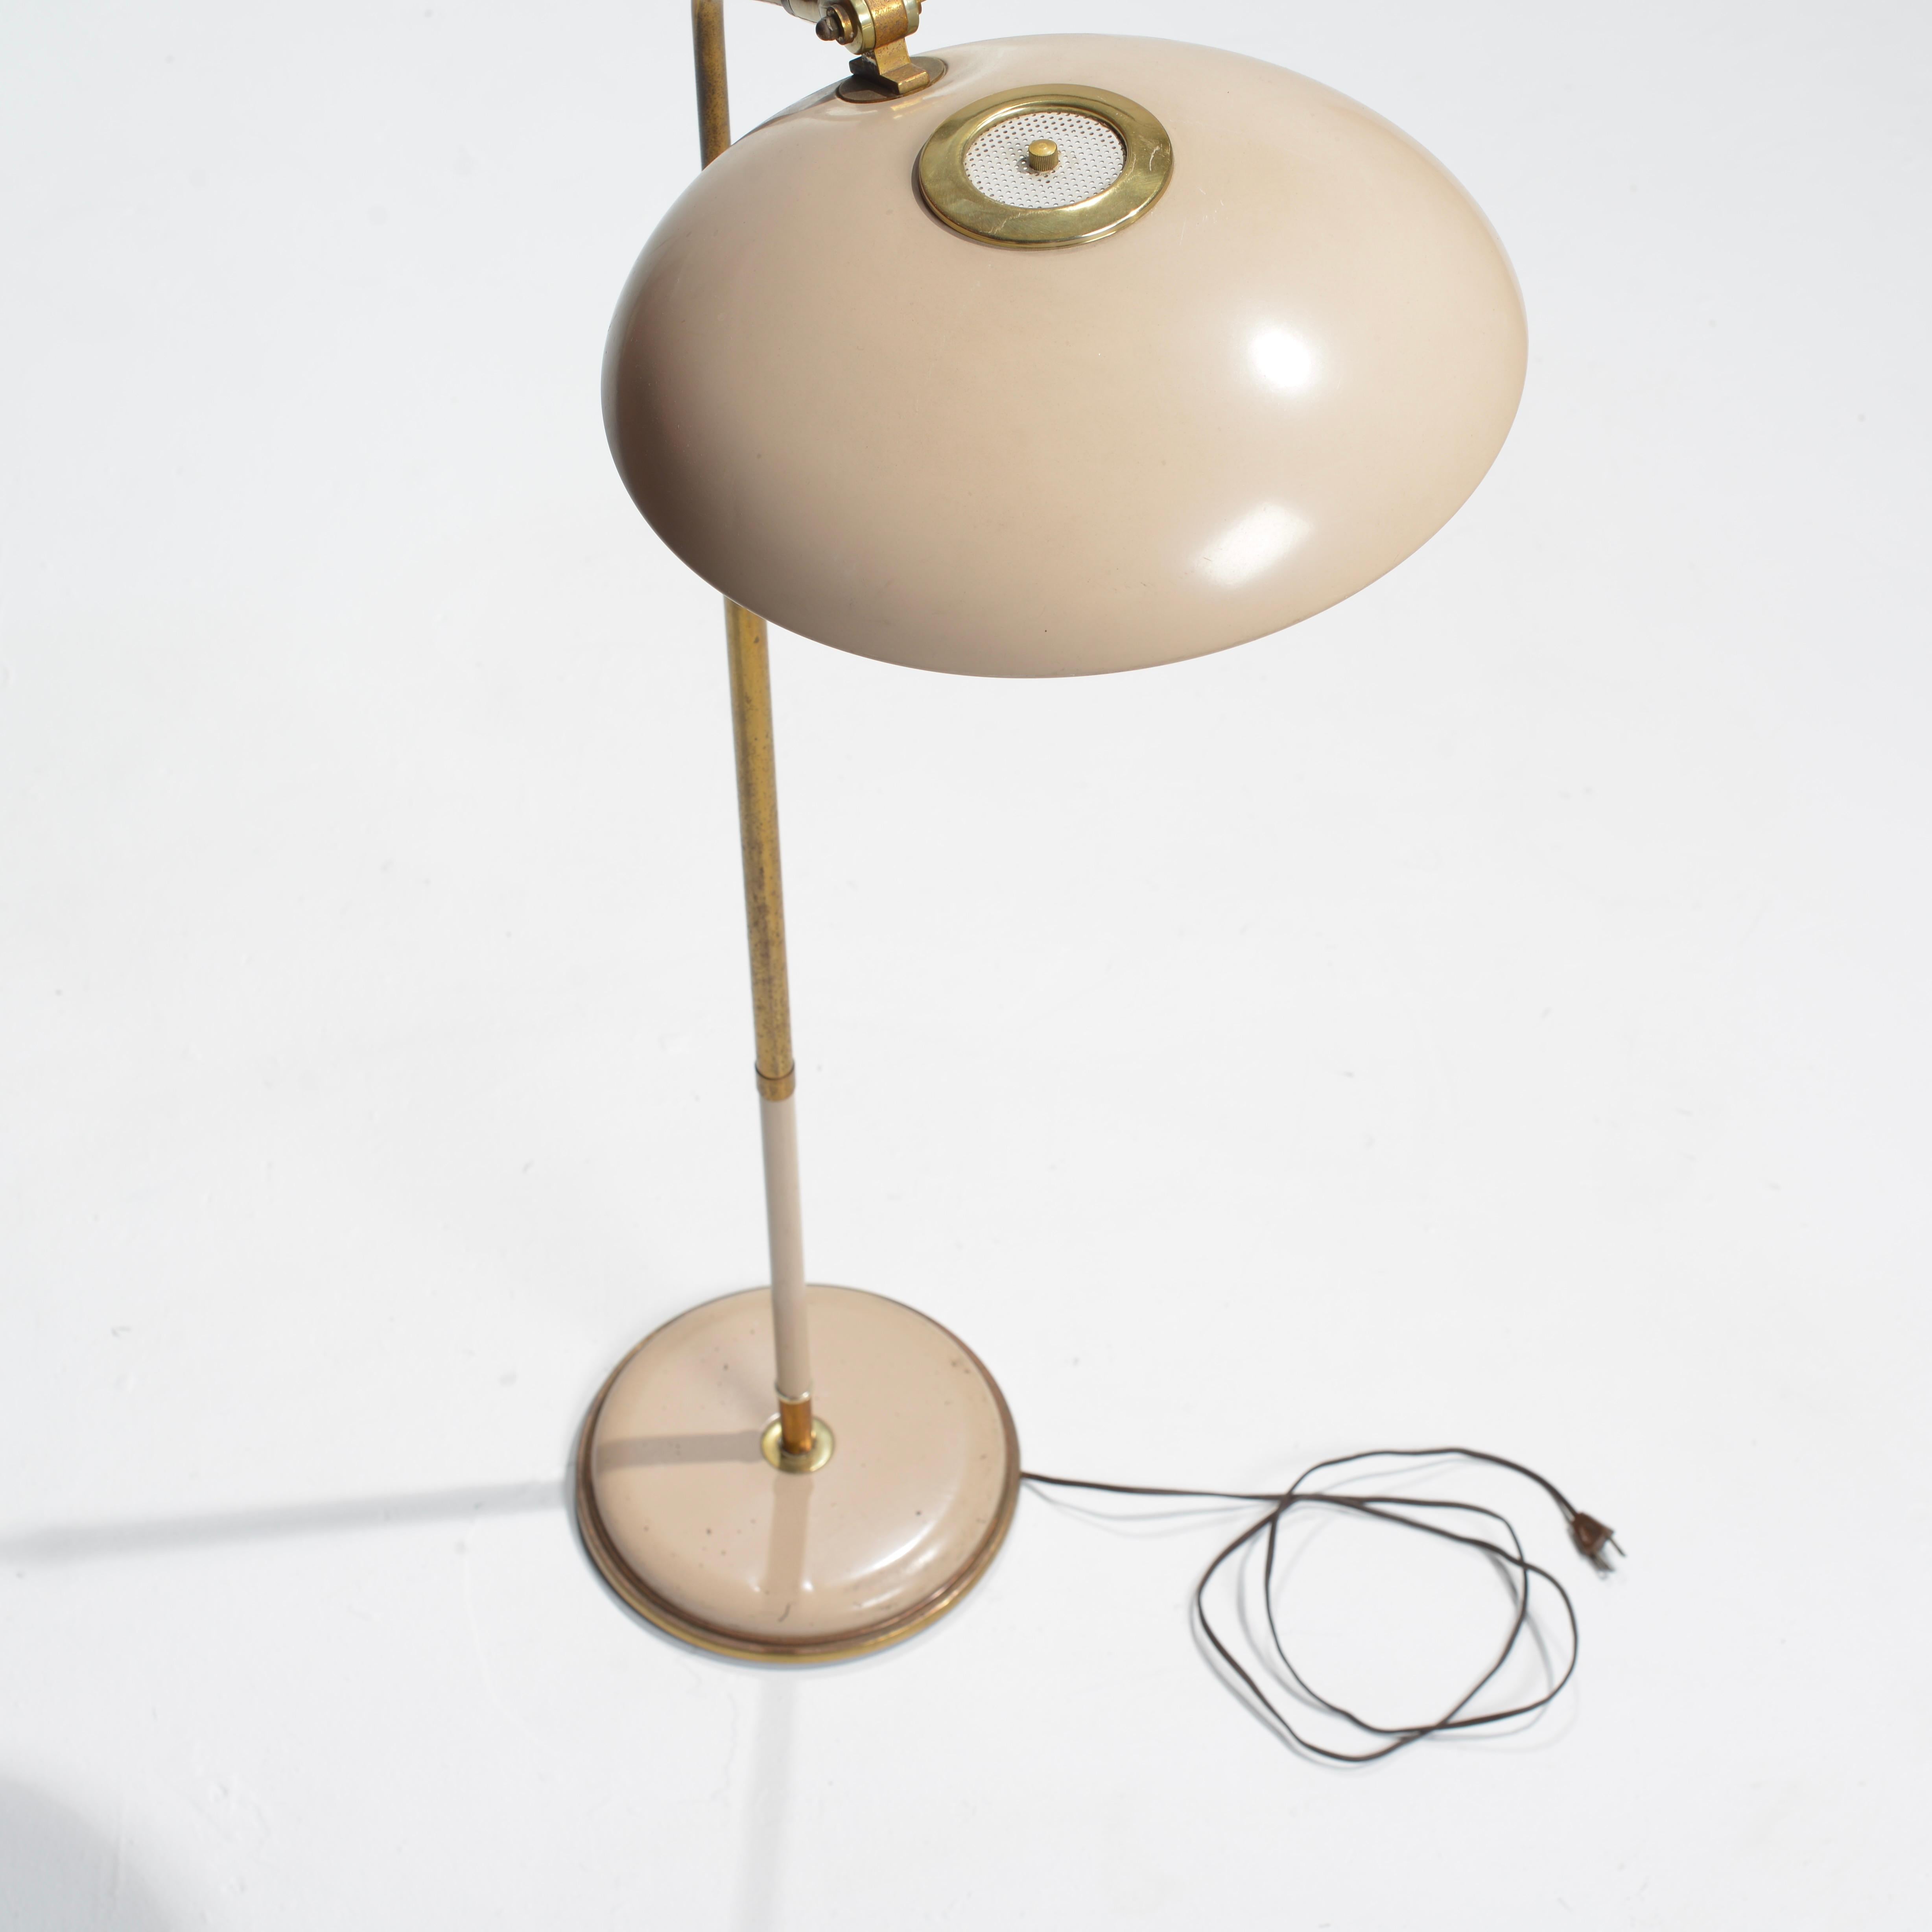 Early and Rare Gerald Thurston for Lightolier Floor Lamp  2